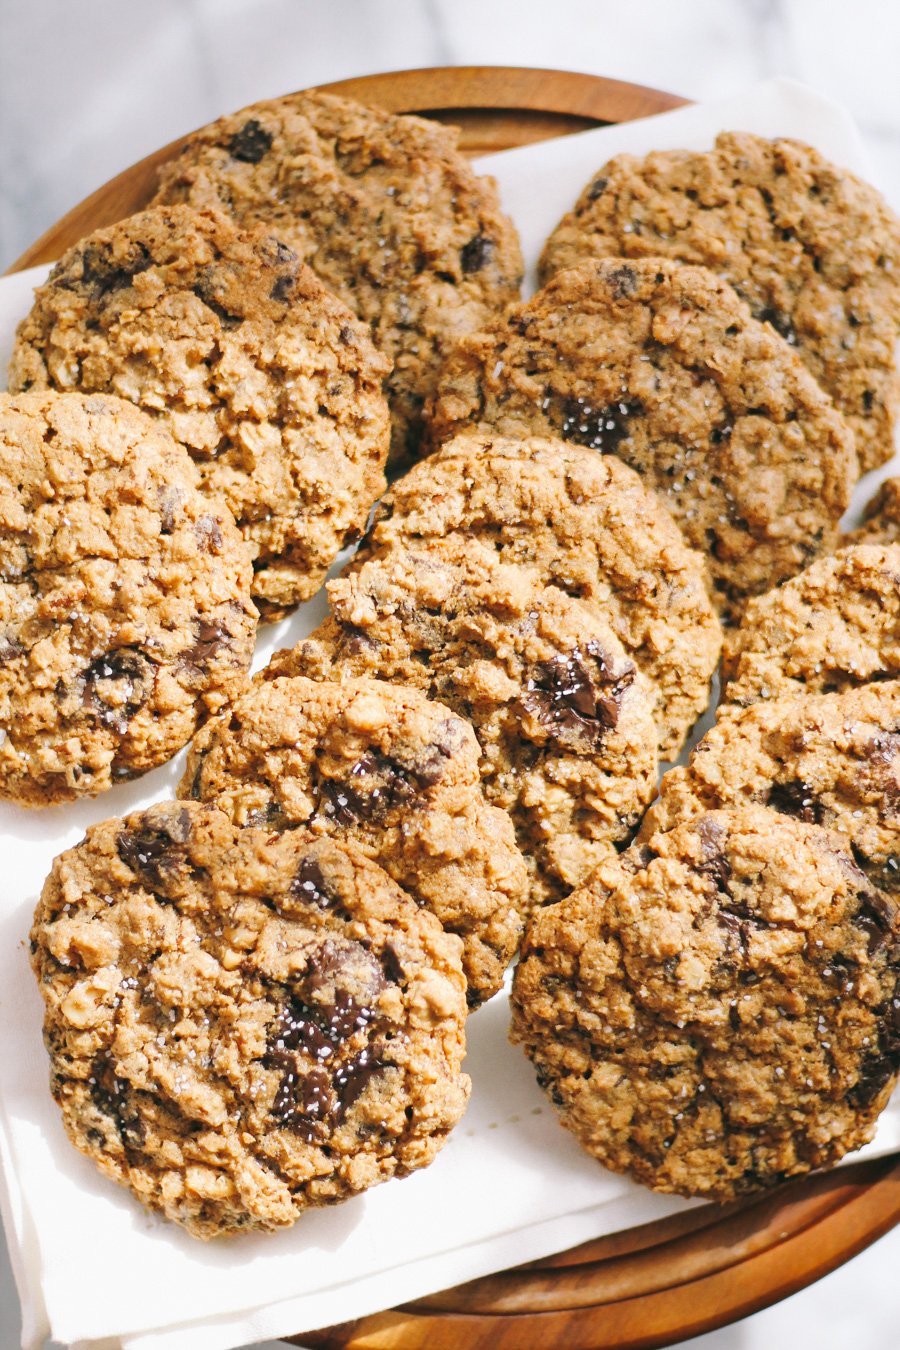 dark chocolate chunk oatmeal cookies with walnuts, pecans, & sea salt via playswellwithbutter | not your average chocolate chip cookie, dark chocolate chunk oatmeal cookies have the perfect crunchy yet chewy texture & are loaded with rich chunks of dark chocolate, walnuts, & pecans. finished with just a kiss of sea salt, these perfect cookies will have you coming back for more!